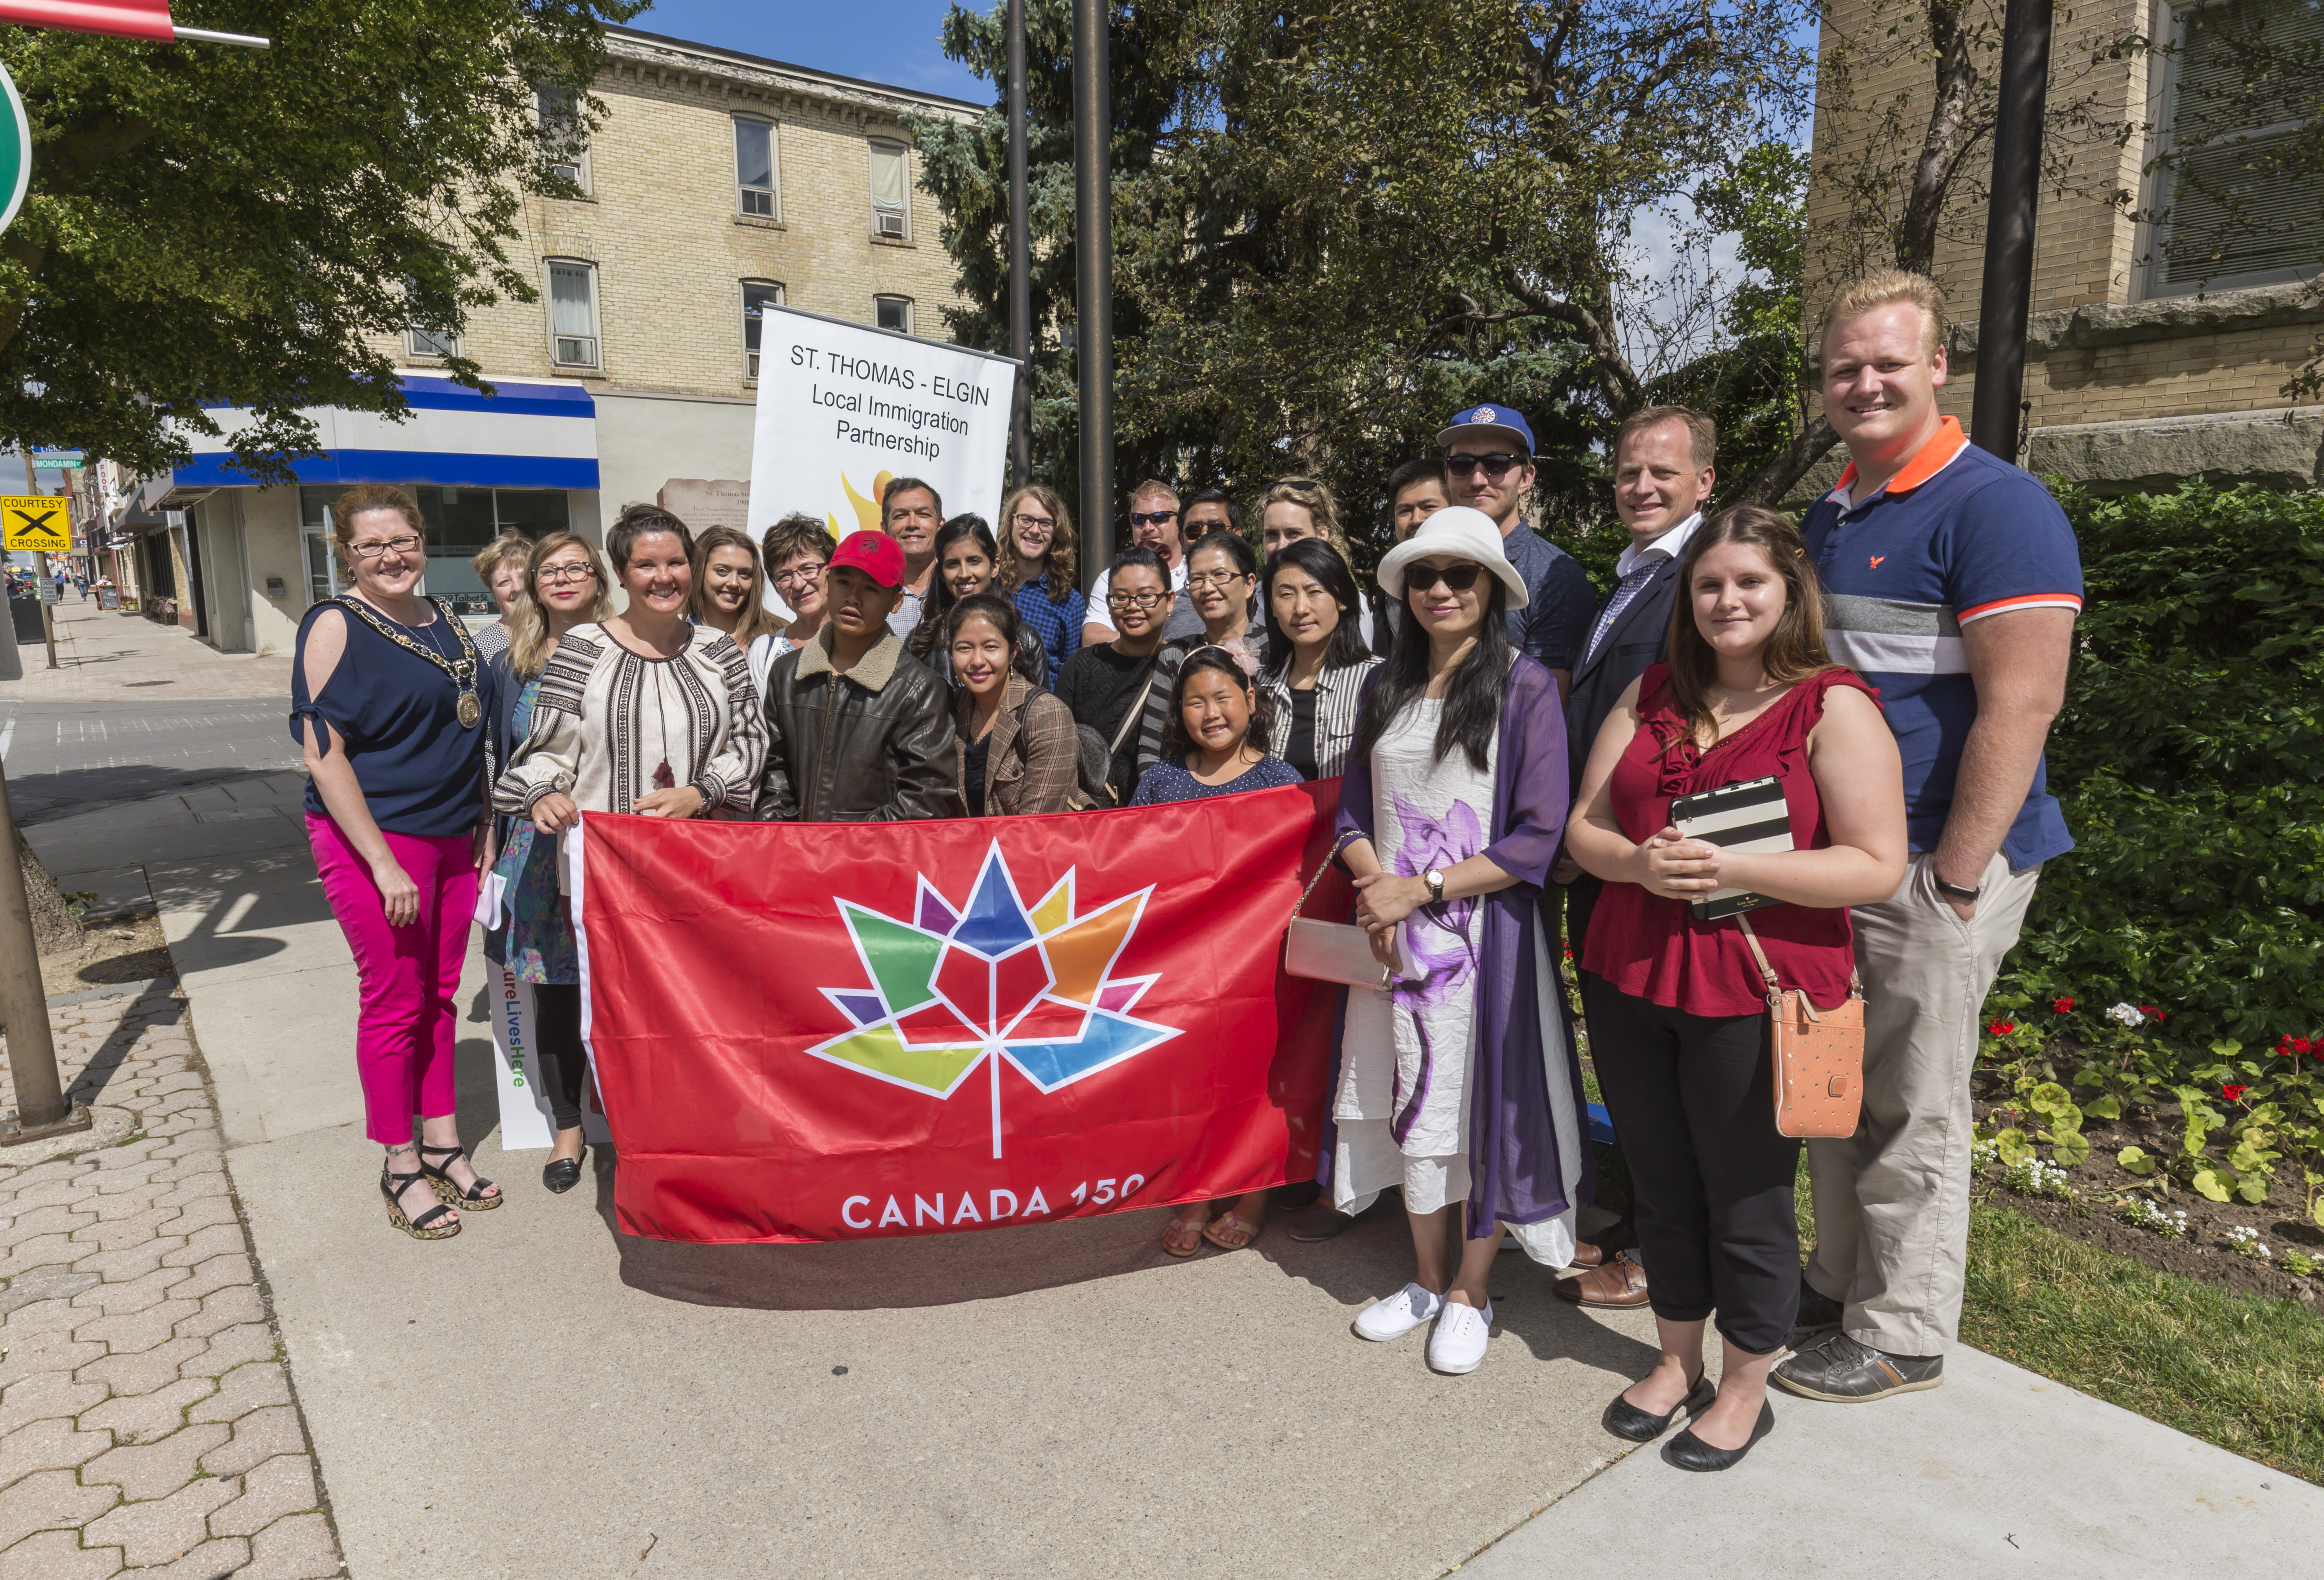 NATIONAL MULTICULTURALISM DAY CELEBRATED